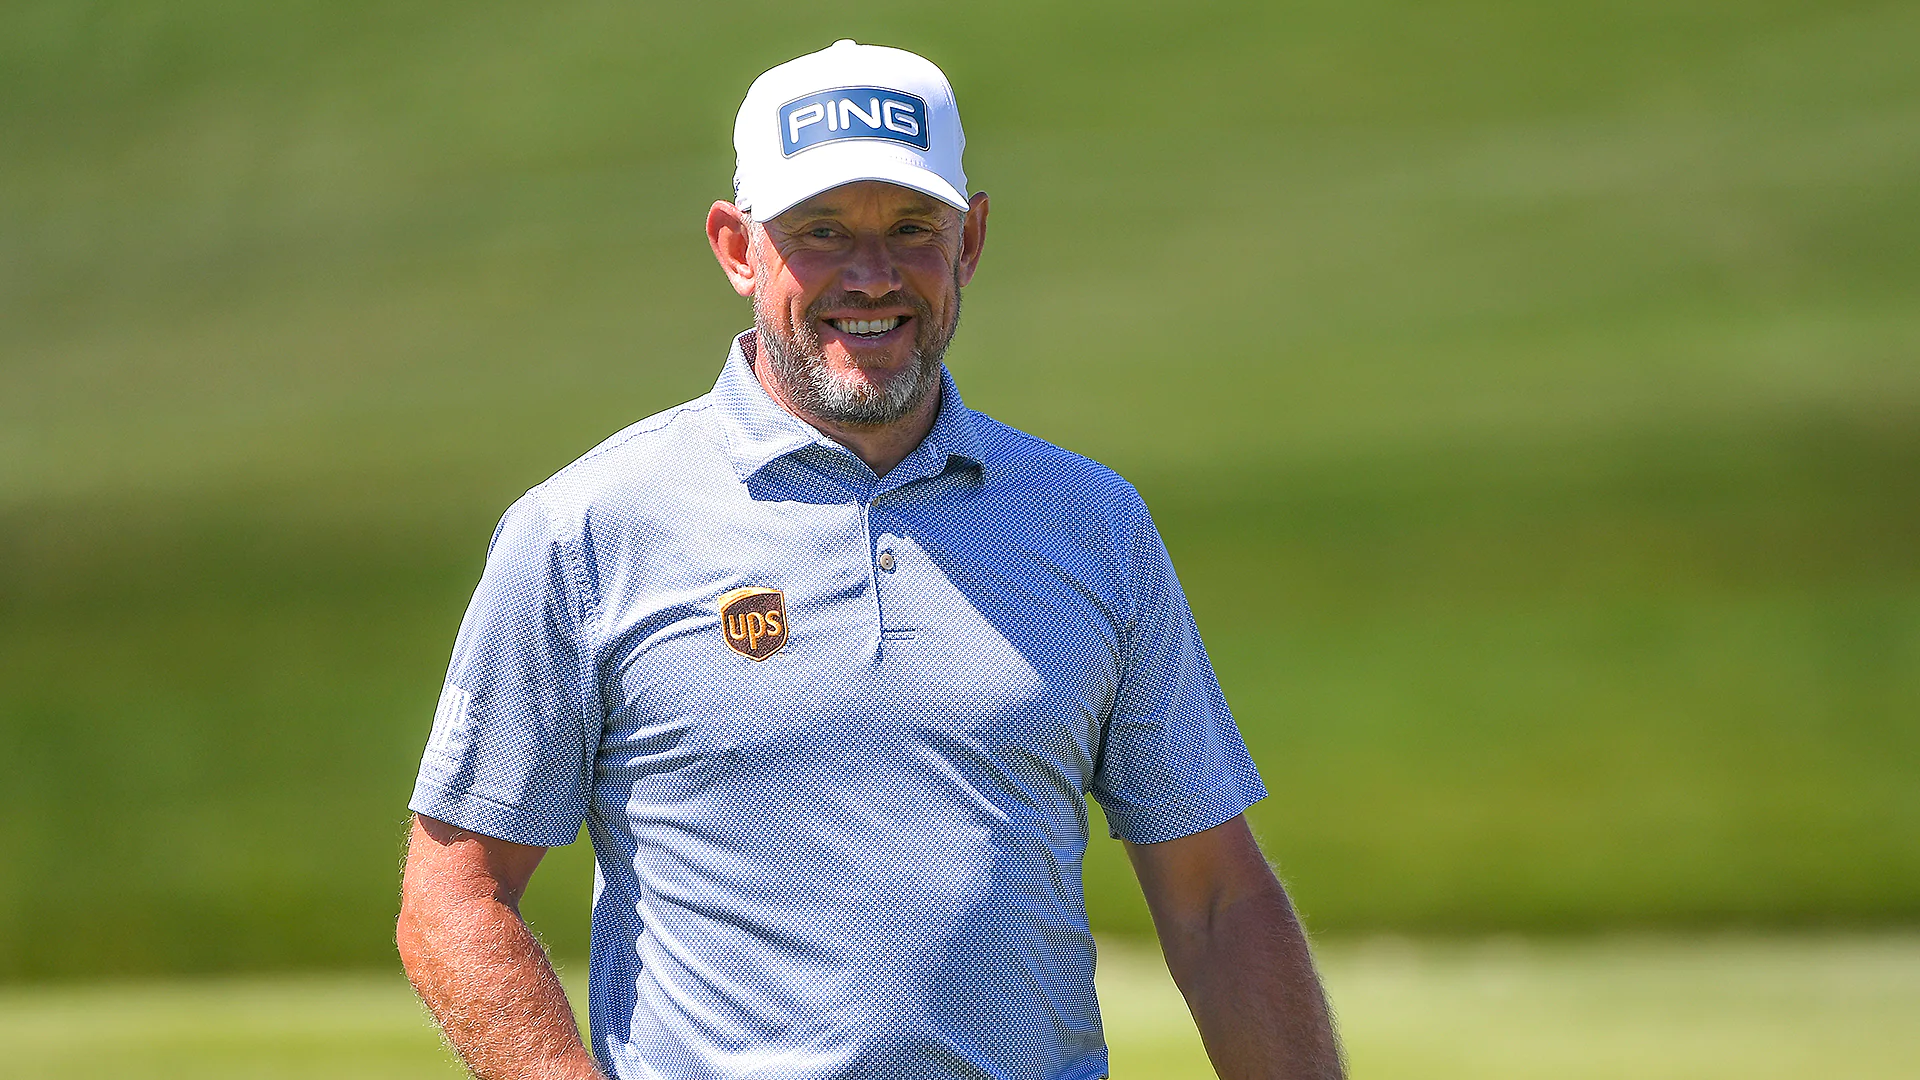 Lee Westwood leads fellow Englishman Matthew Fitzpatrick by 1 at The 2021 Players